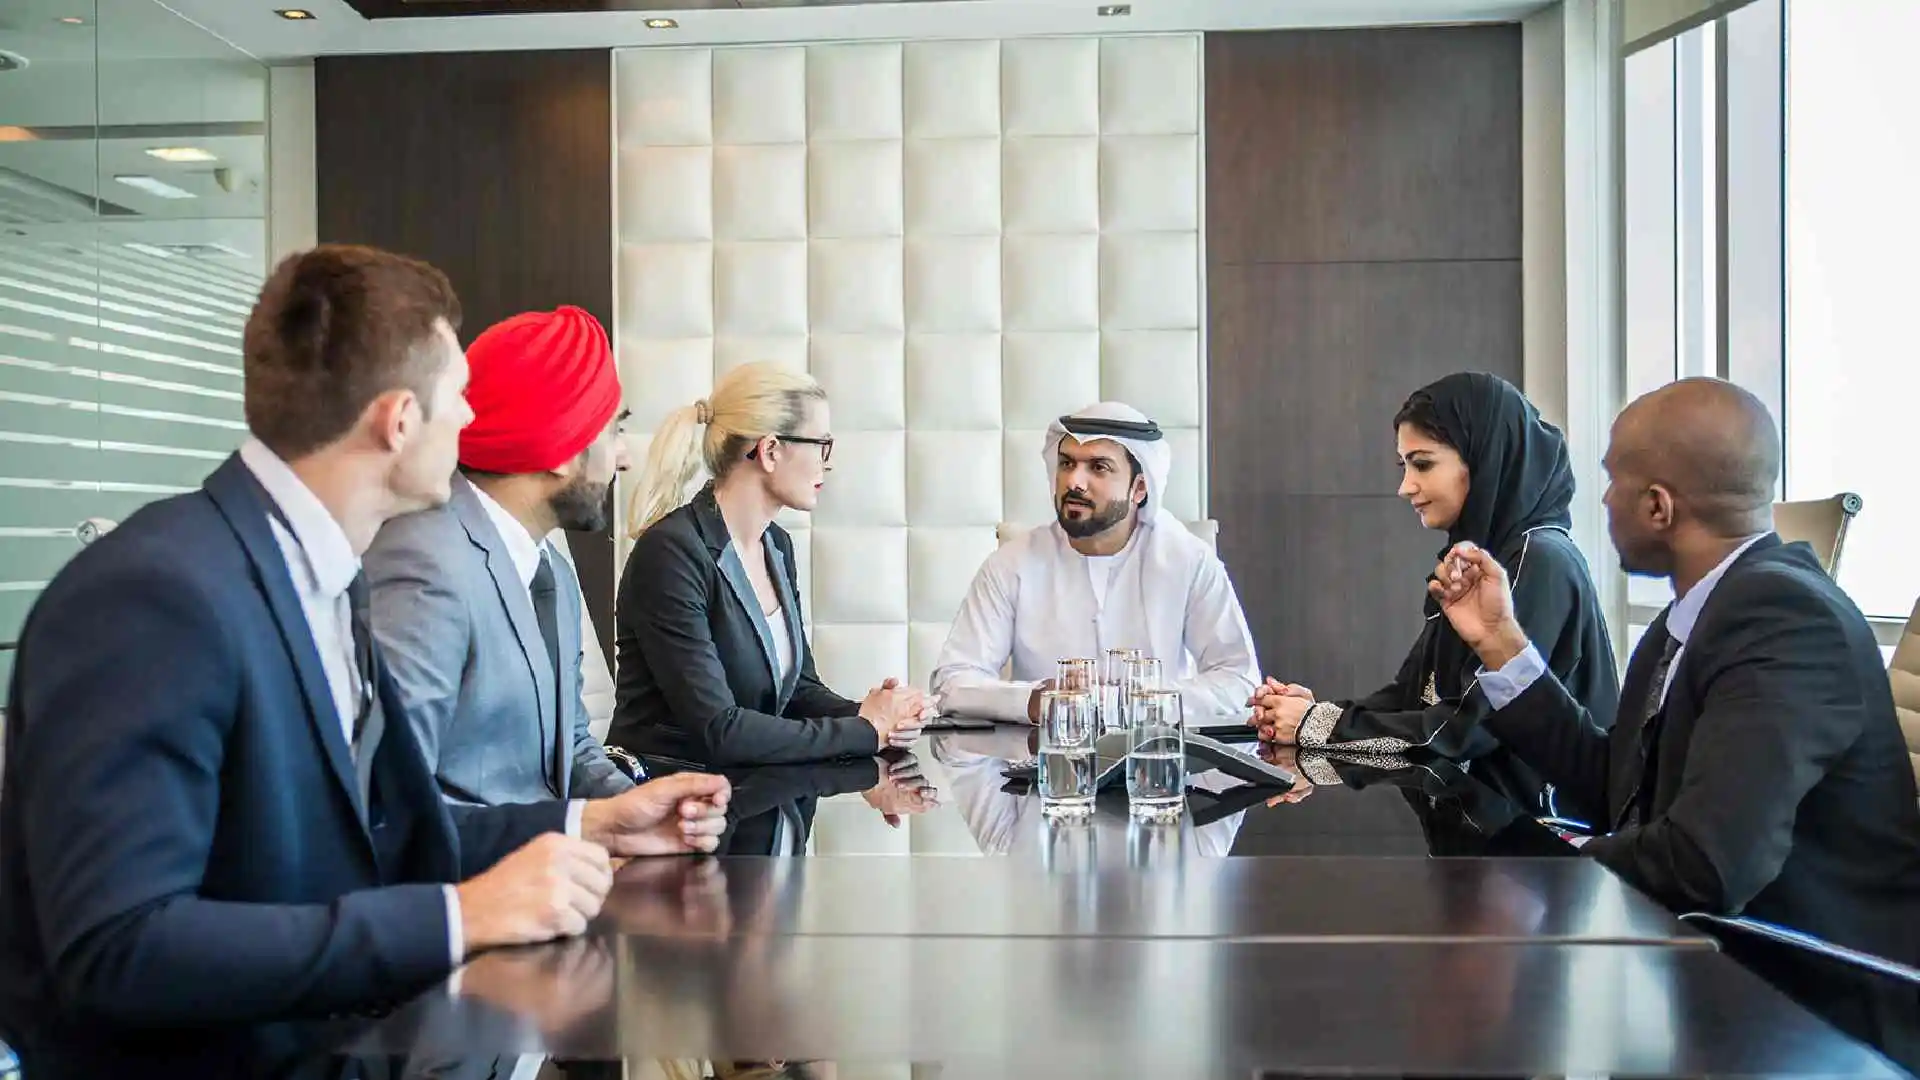 Business executives networking at a conference in Dubai, highlighting the city's role as a hub for international business events.